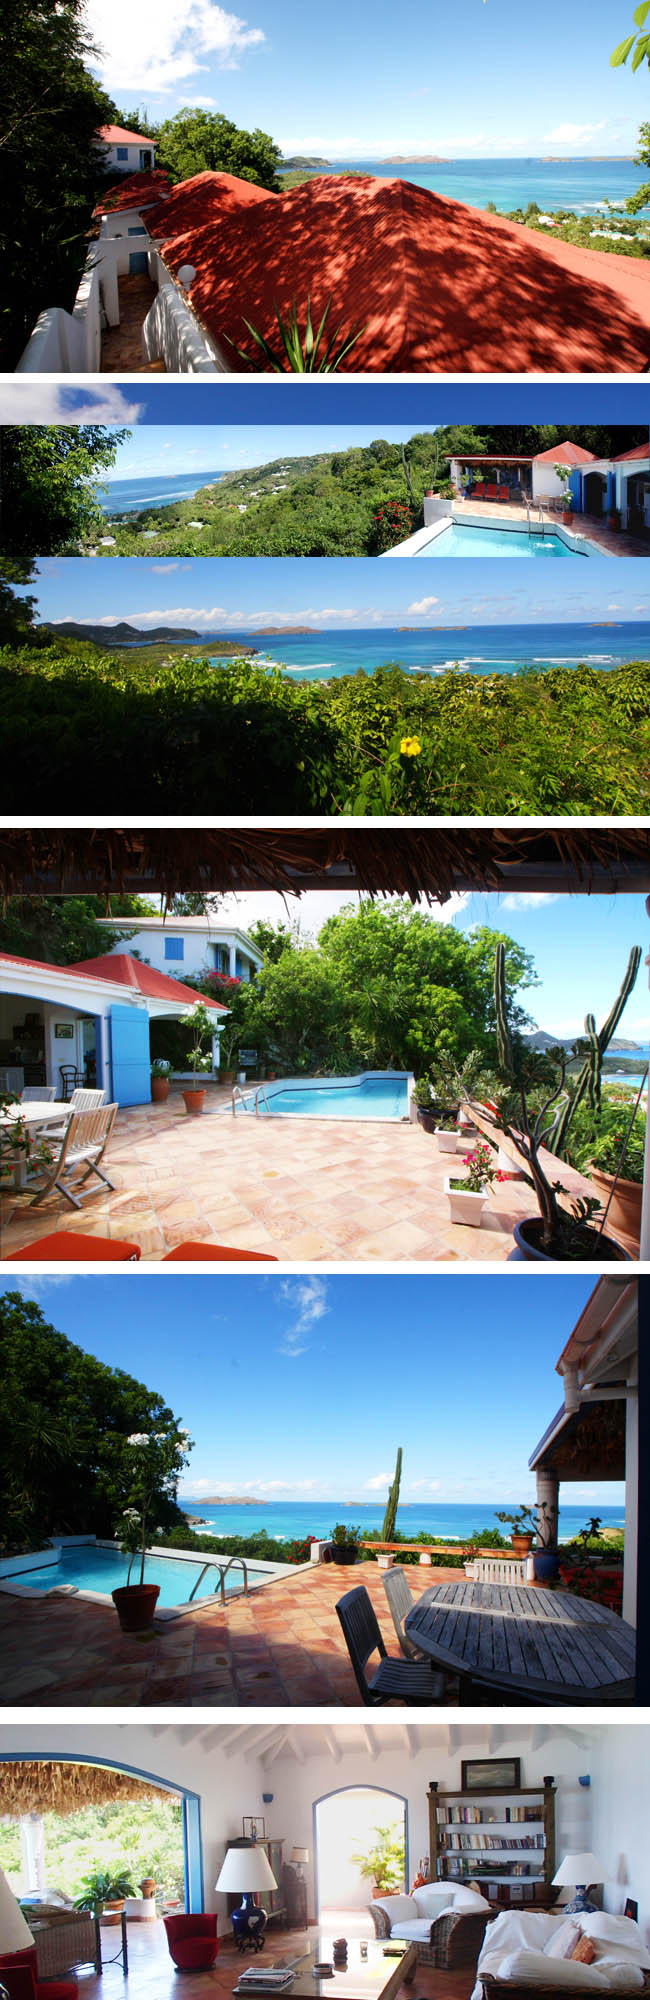 listing SBR 2Mlo in St Barthelemy of St Barth Realty of St Barths